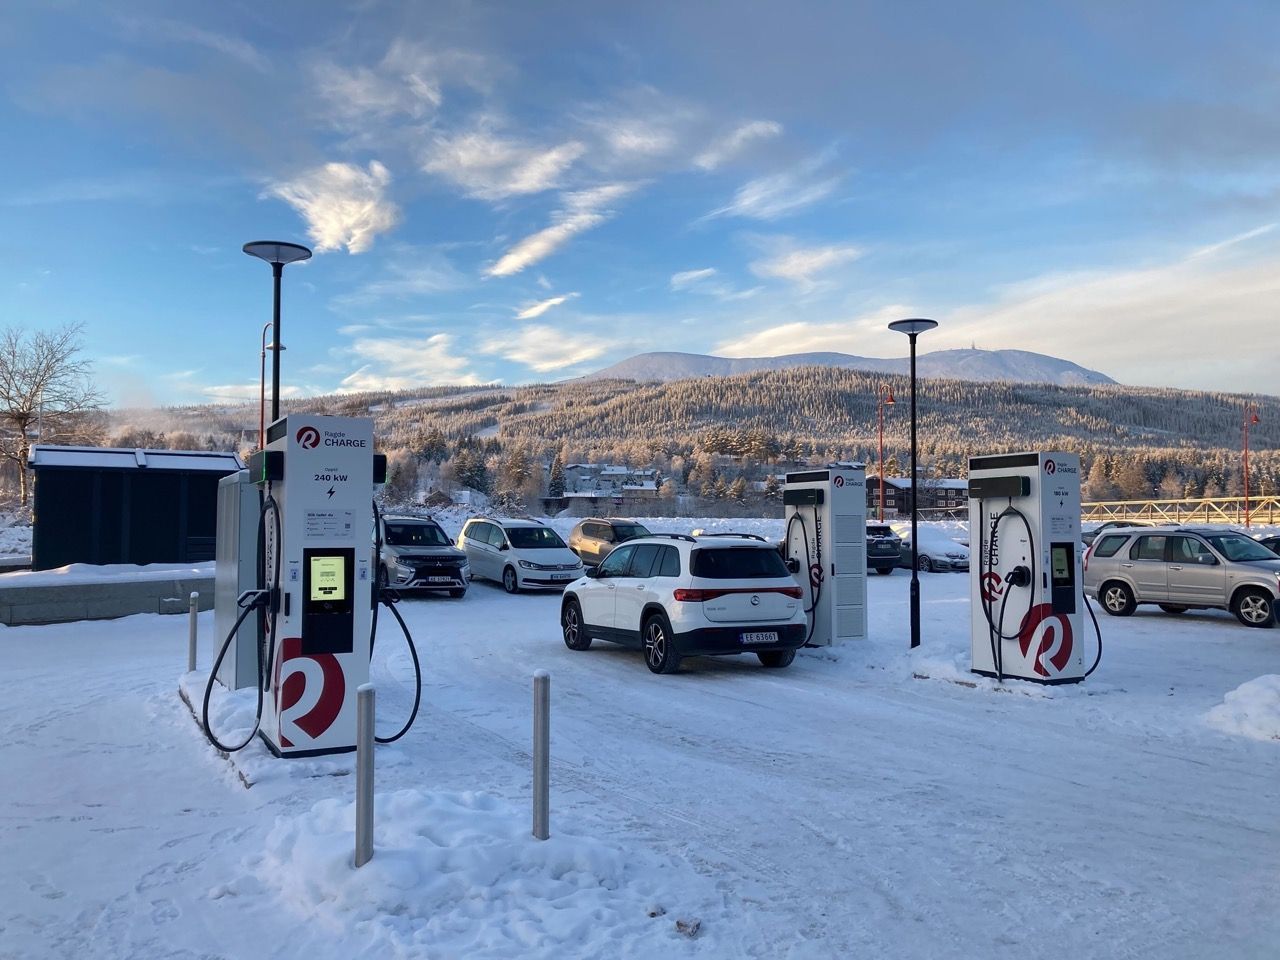 Ragde Charge site in the snow mountains of Norway